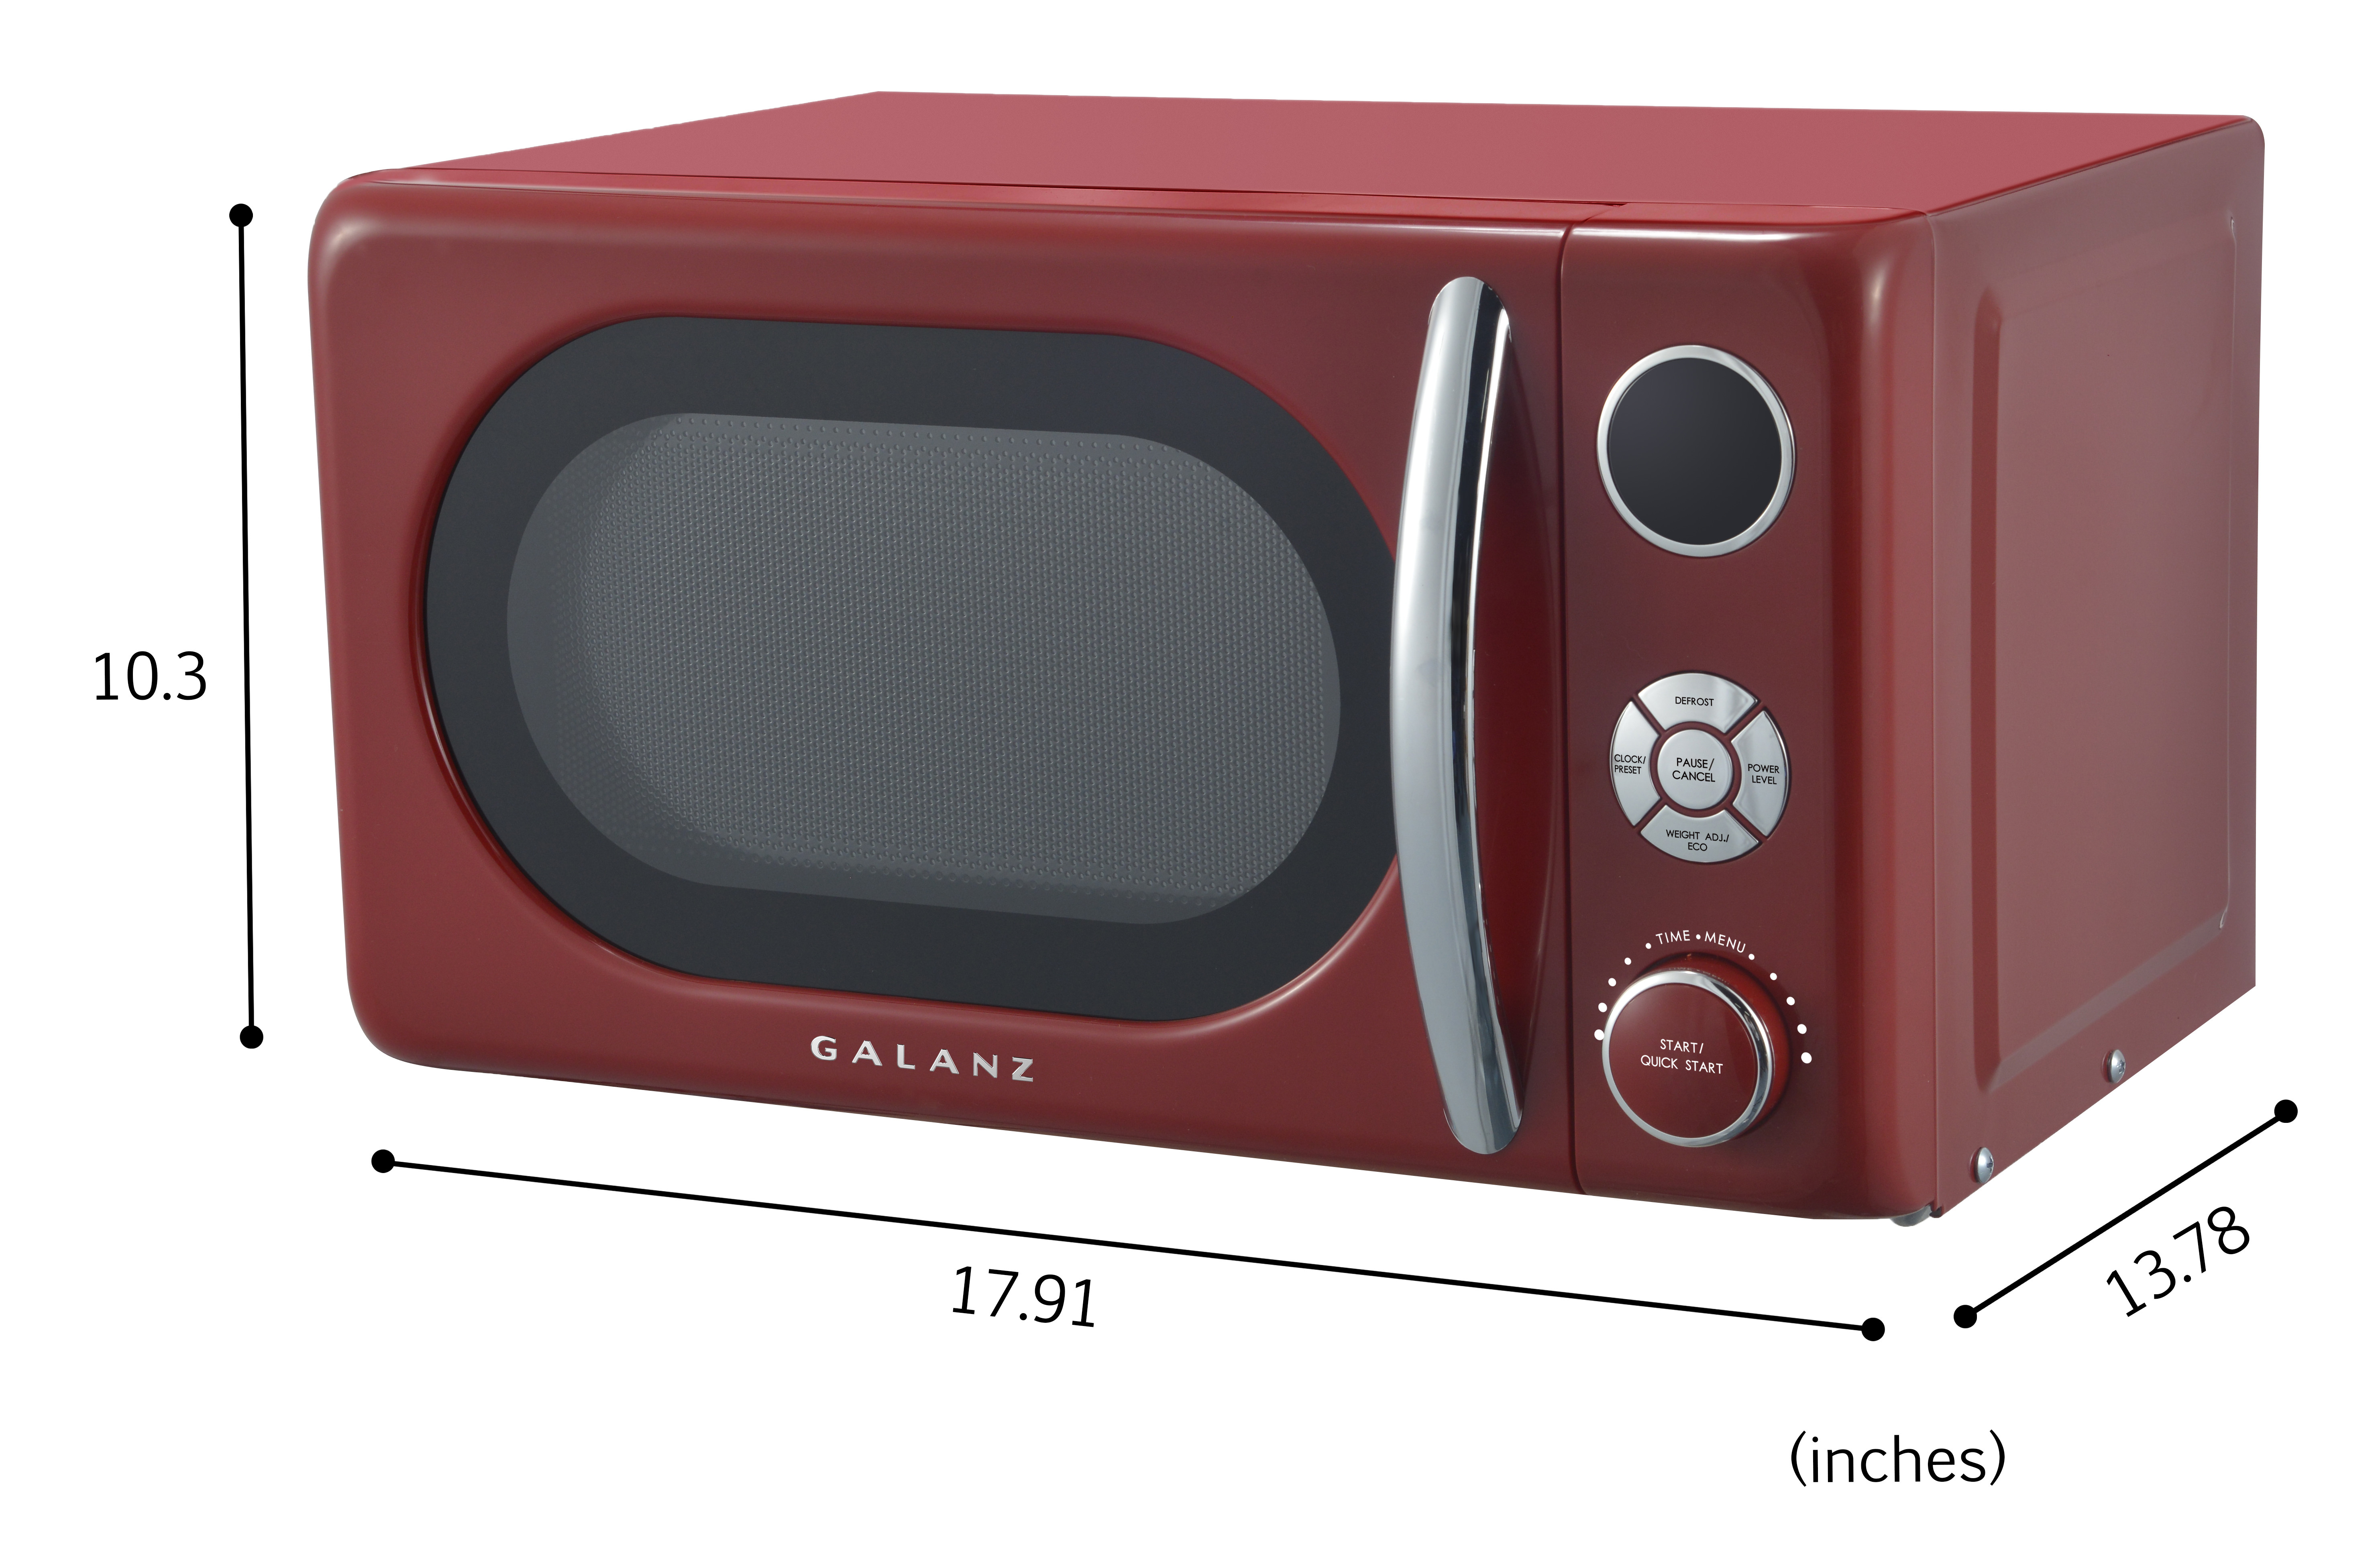 Galanz GLCMKA07RDR-07 0.7 Cu.ft Retro Countertop Microwave 700W, Red - image 3 of 4